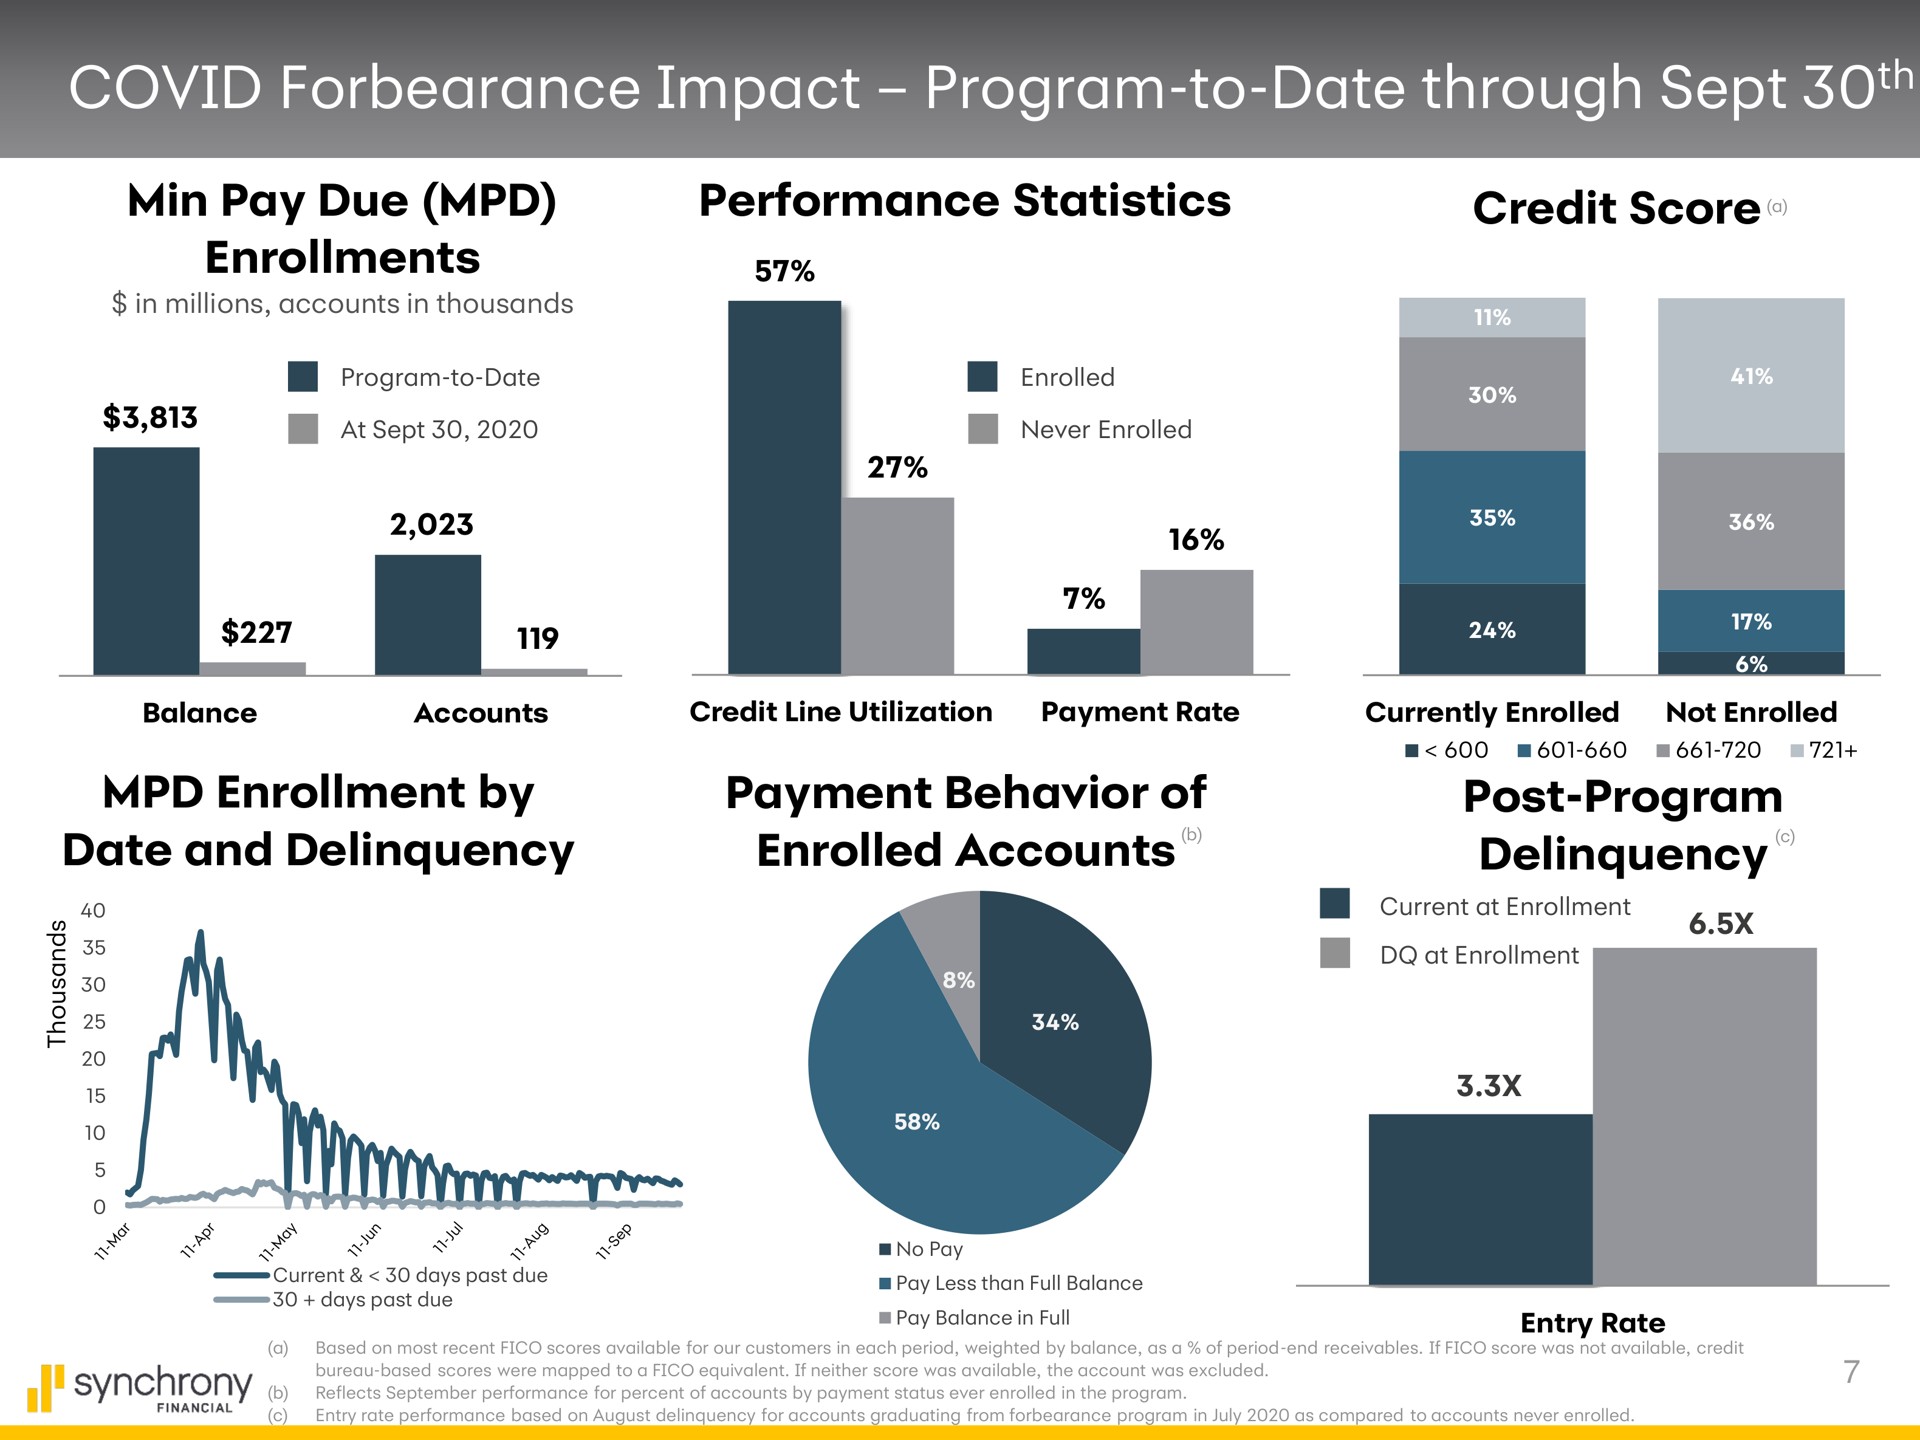 covid forbearance impact program to date through sept performance statistics credit score a min pay due enrollments enrollment by date and delinquency payment behavior of enrolled accounts post program delinquency | Synchrony Financial